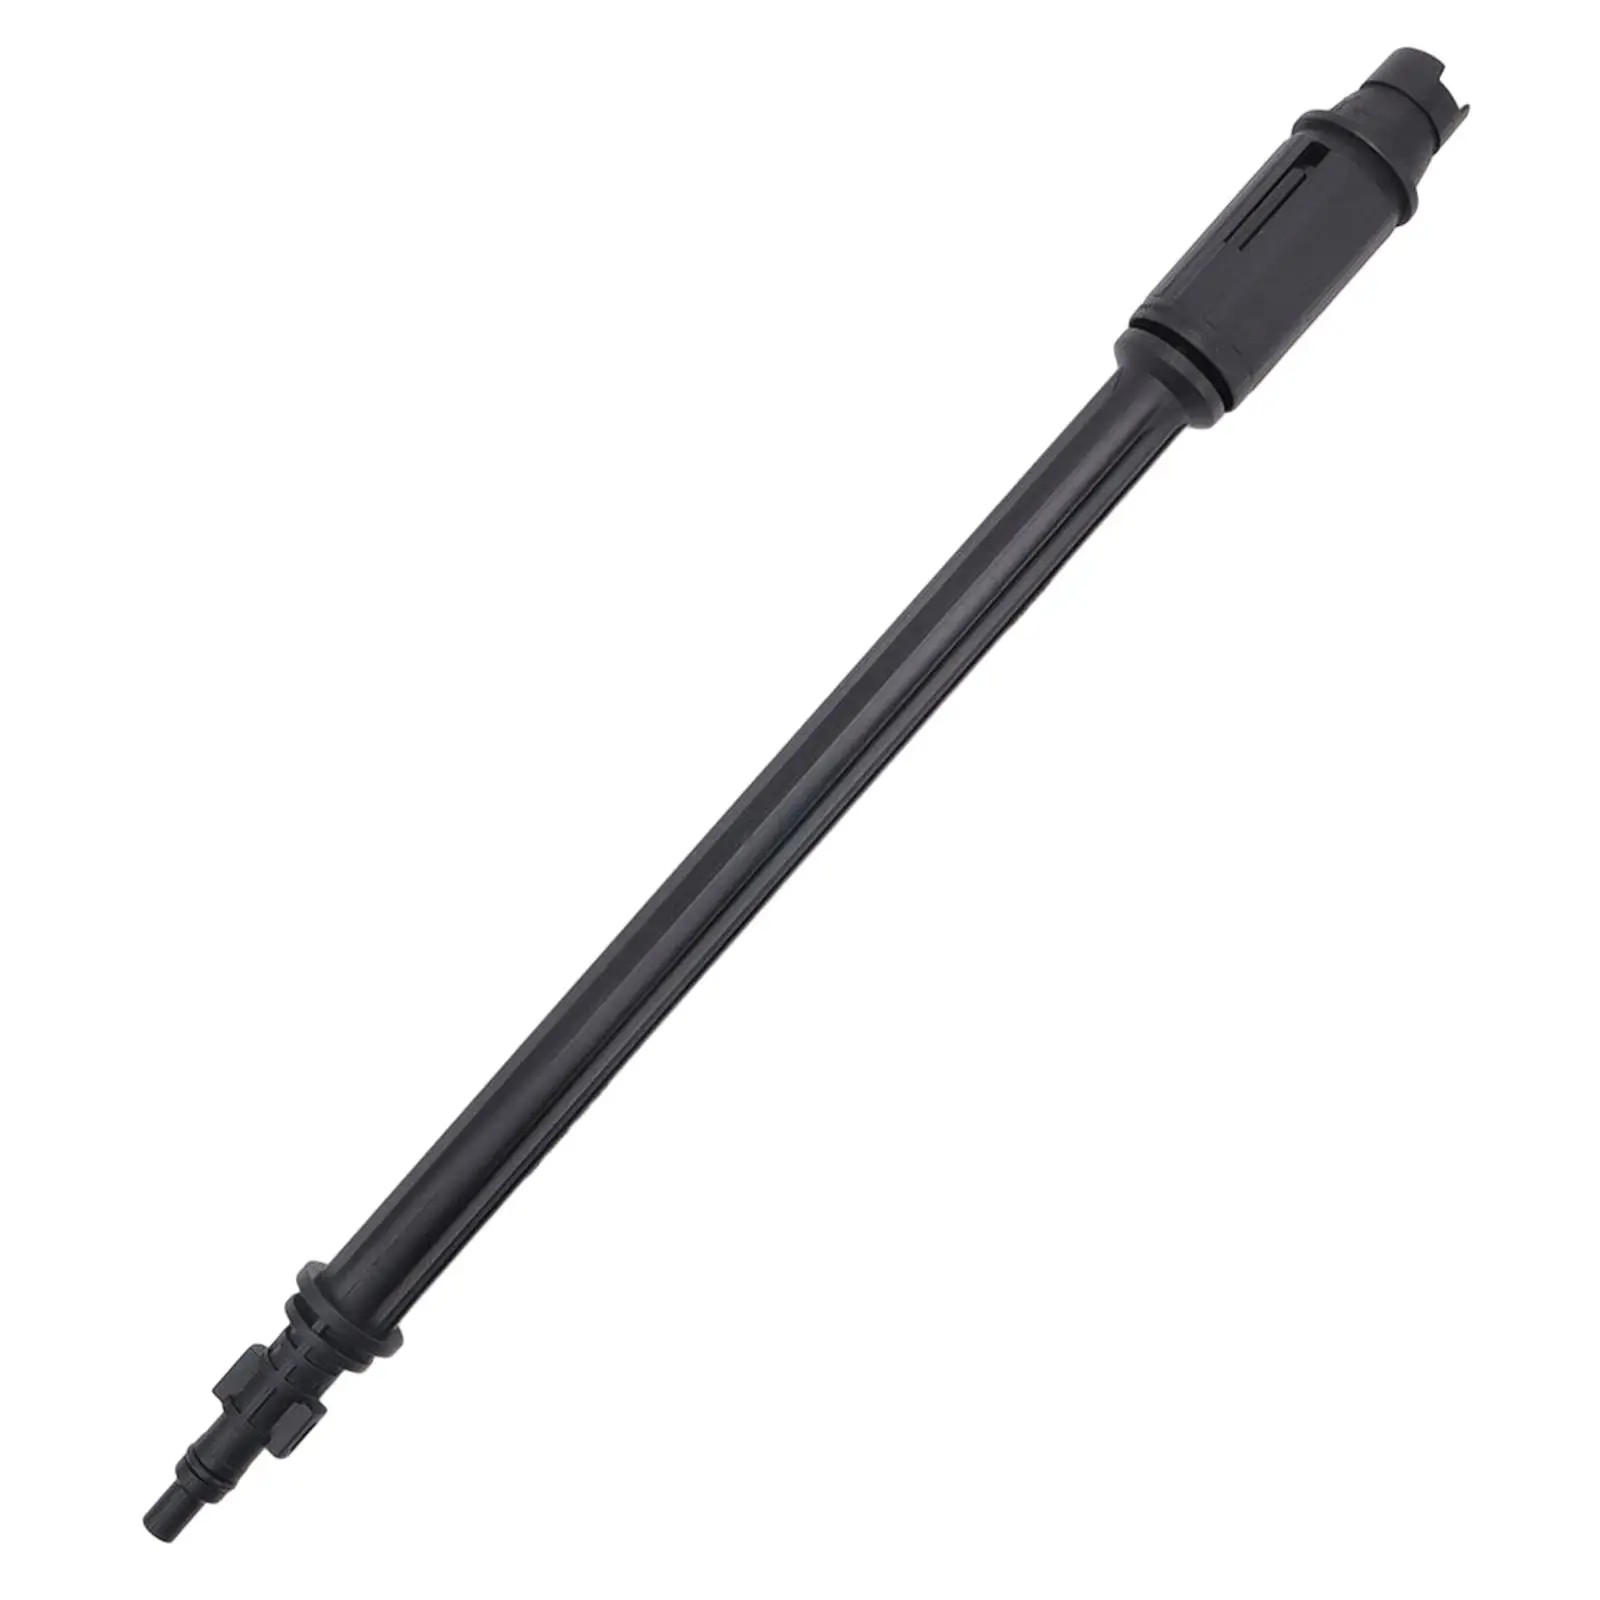 Cordless Pressure Washer Wand Cleaning Rod Quick Connect Parts Car Washing Adjustable Nozzle Replacement Jet Nozzle for Lavor